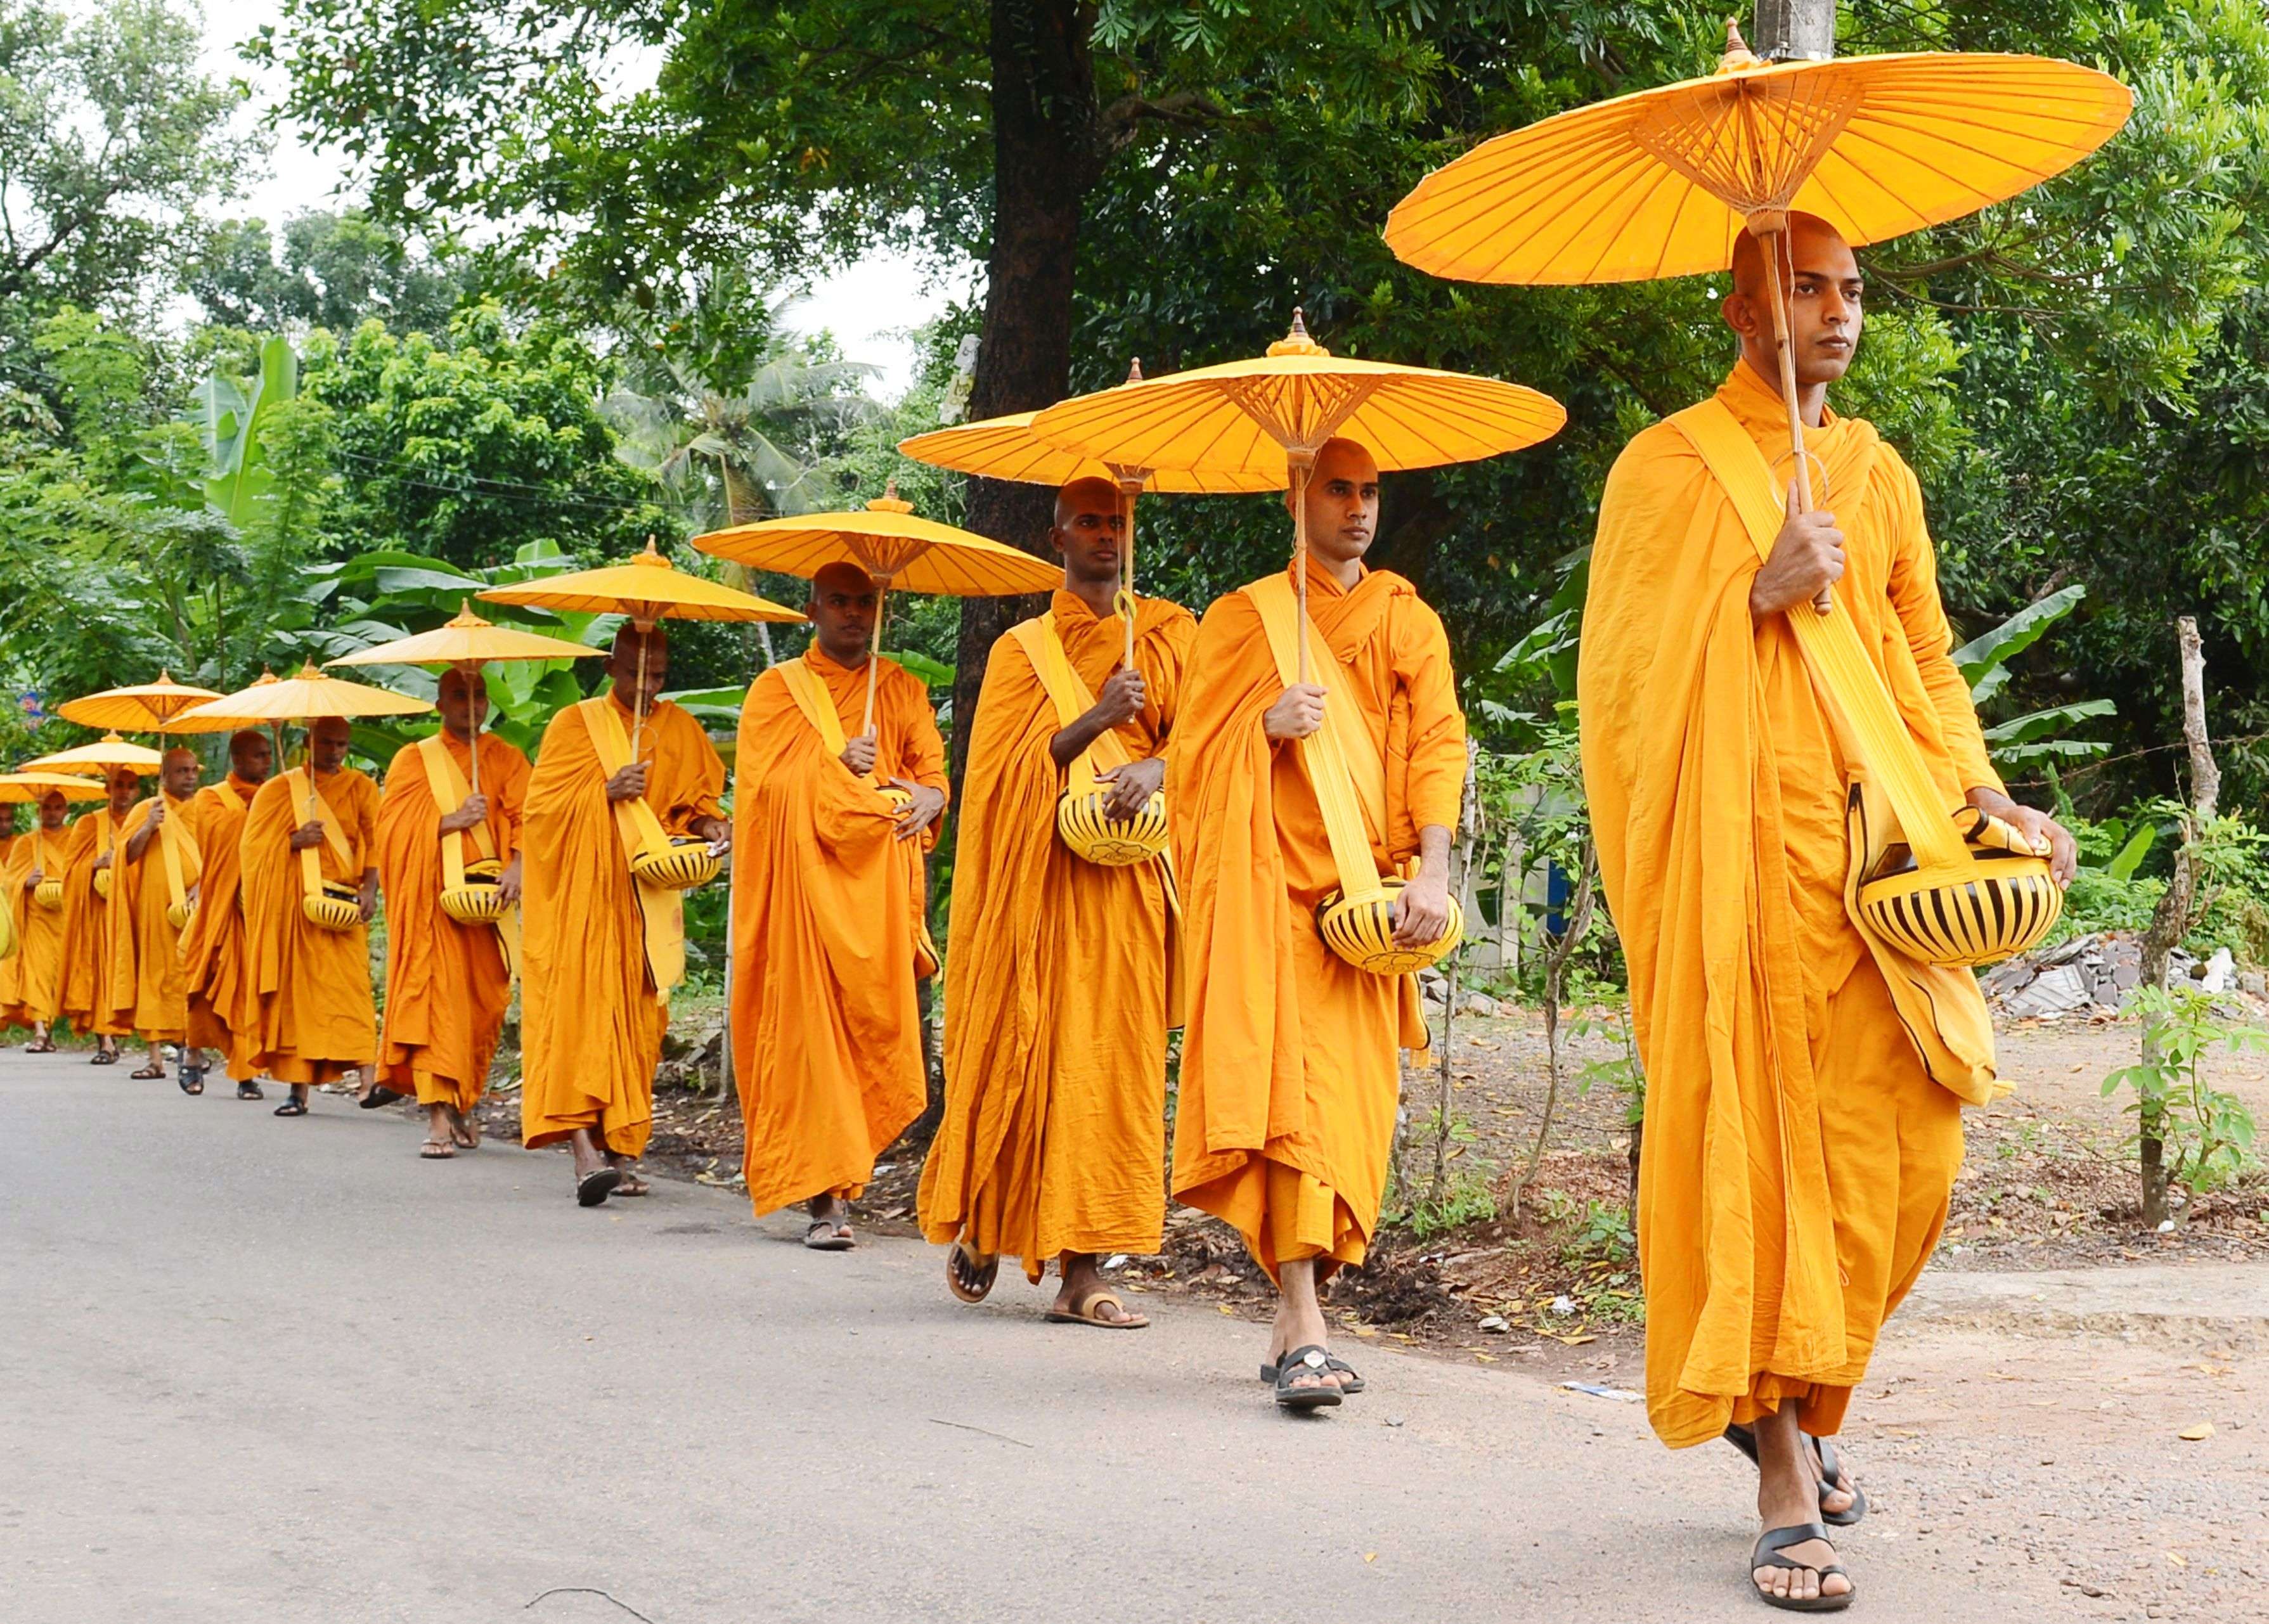 Sri Lankan Buddhist monks walk in line as they seek offerings of food in Colombo. The Buddhist majority nation later in the month will commemorate the introduction of Buddhism to the island, which spread with the arrival of Emperor Ashoka from neighbouring India during the 3rd century.(AFP/Lakruwan Wanniarachchi) 